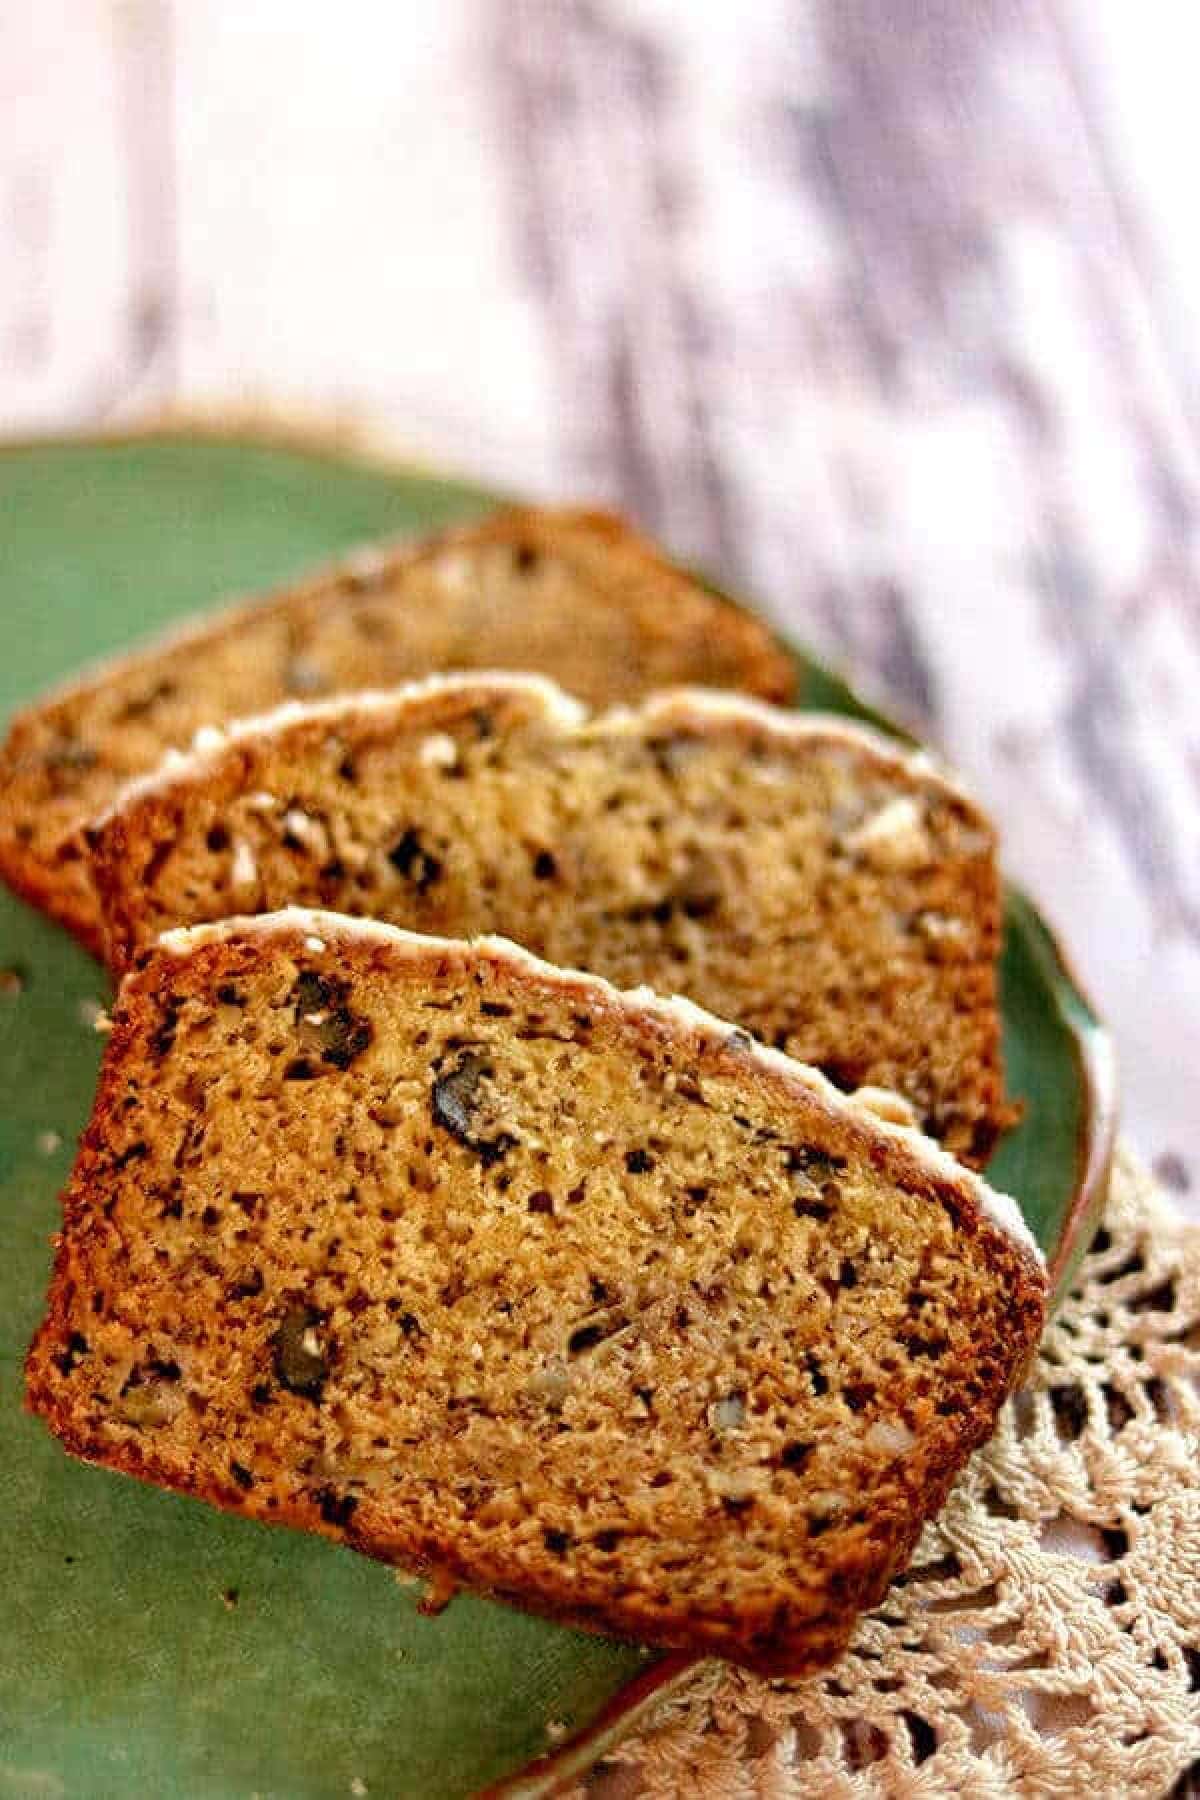 Slices of banana bread on a green plate.